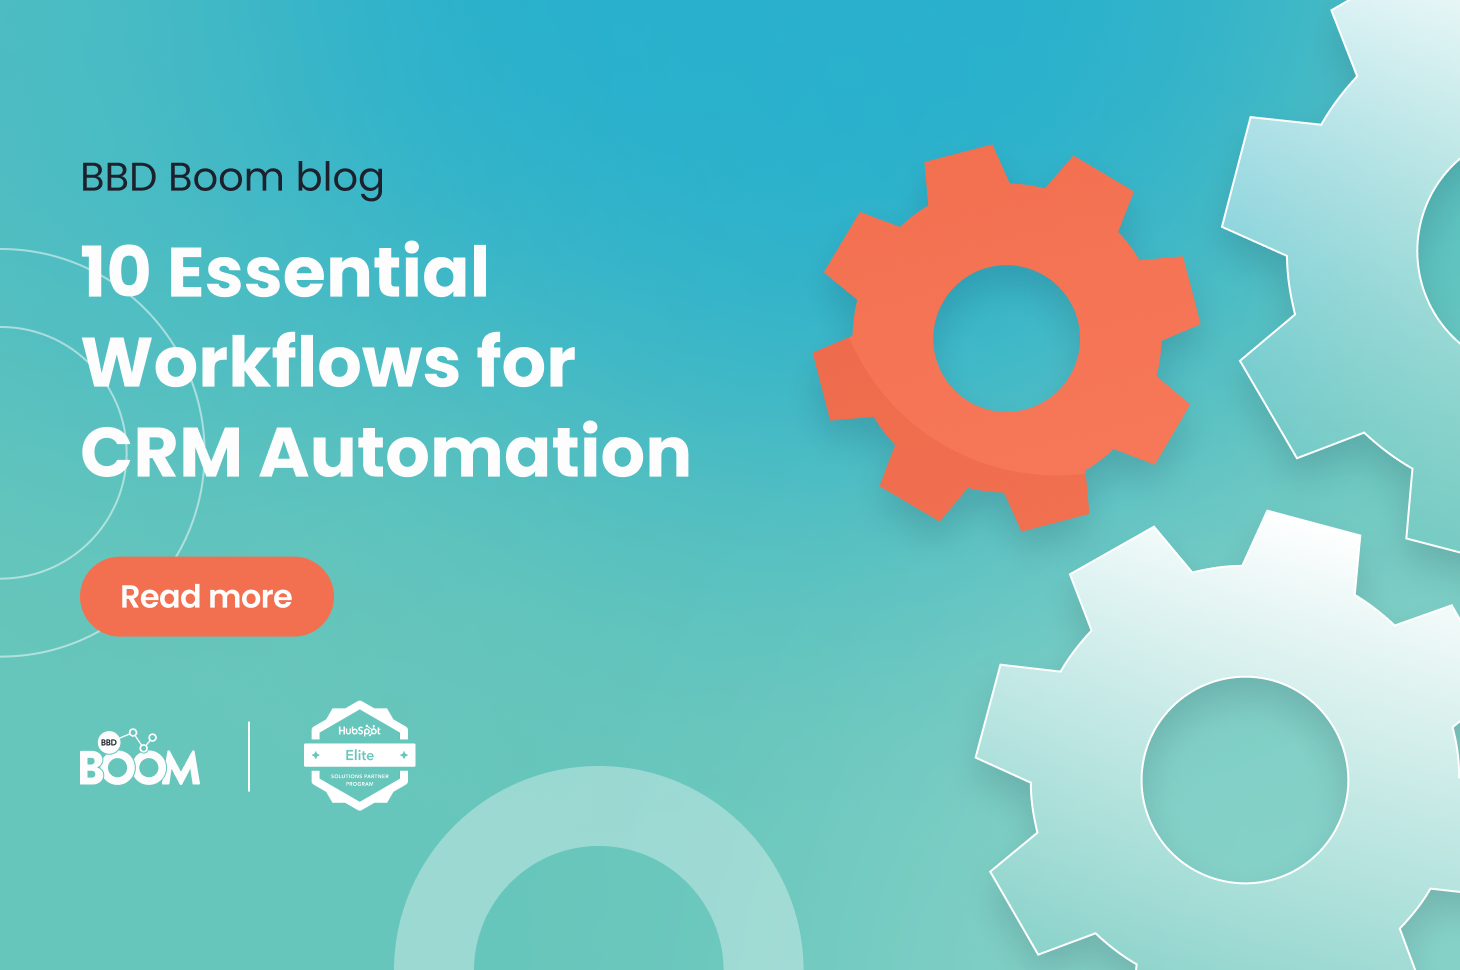 10 Essential Workflows for CRM Automation